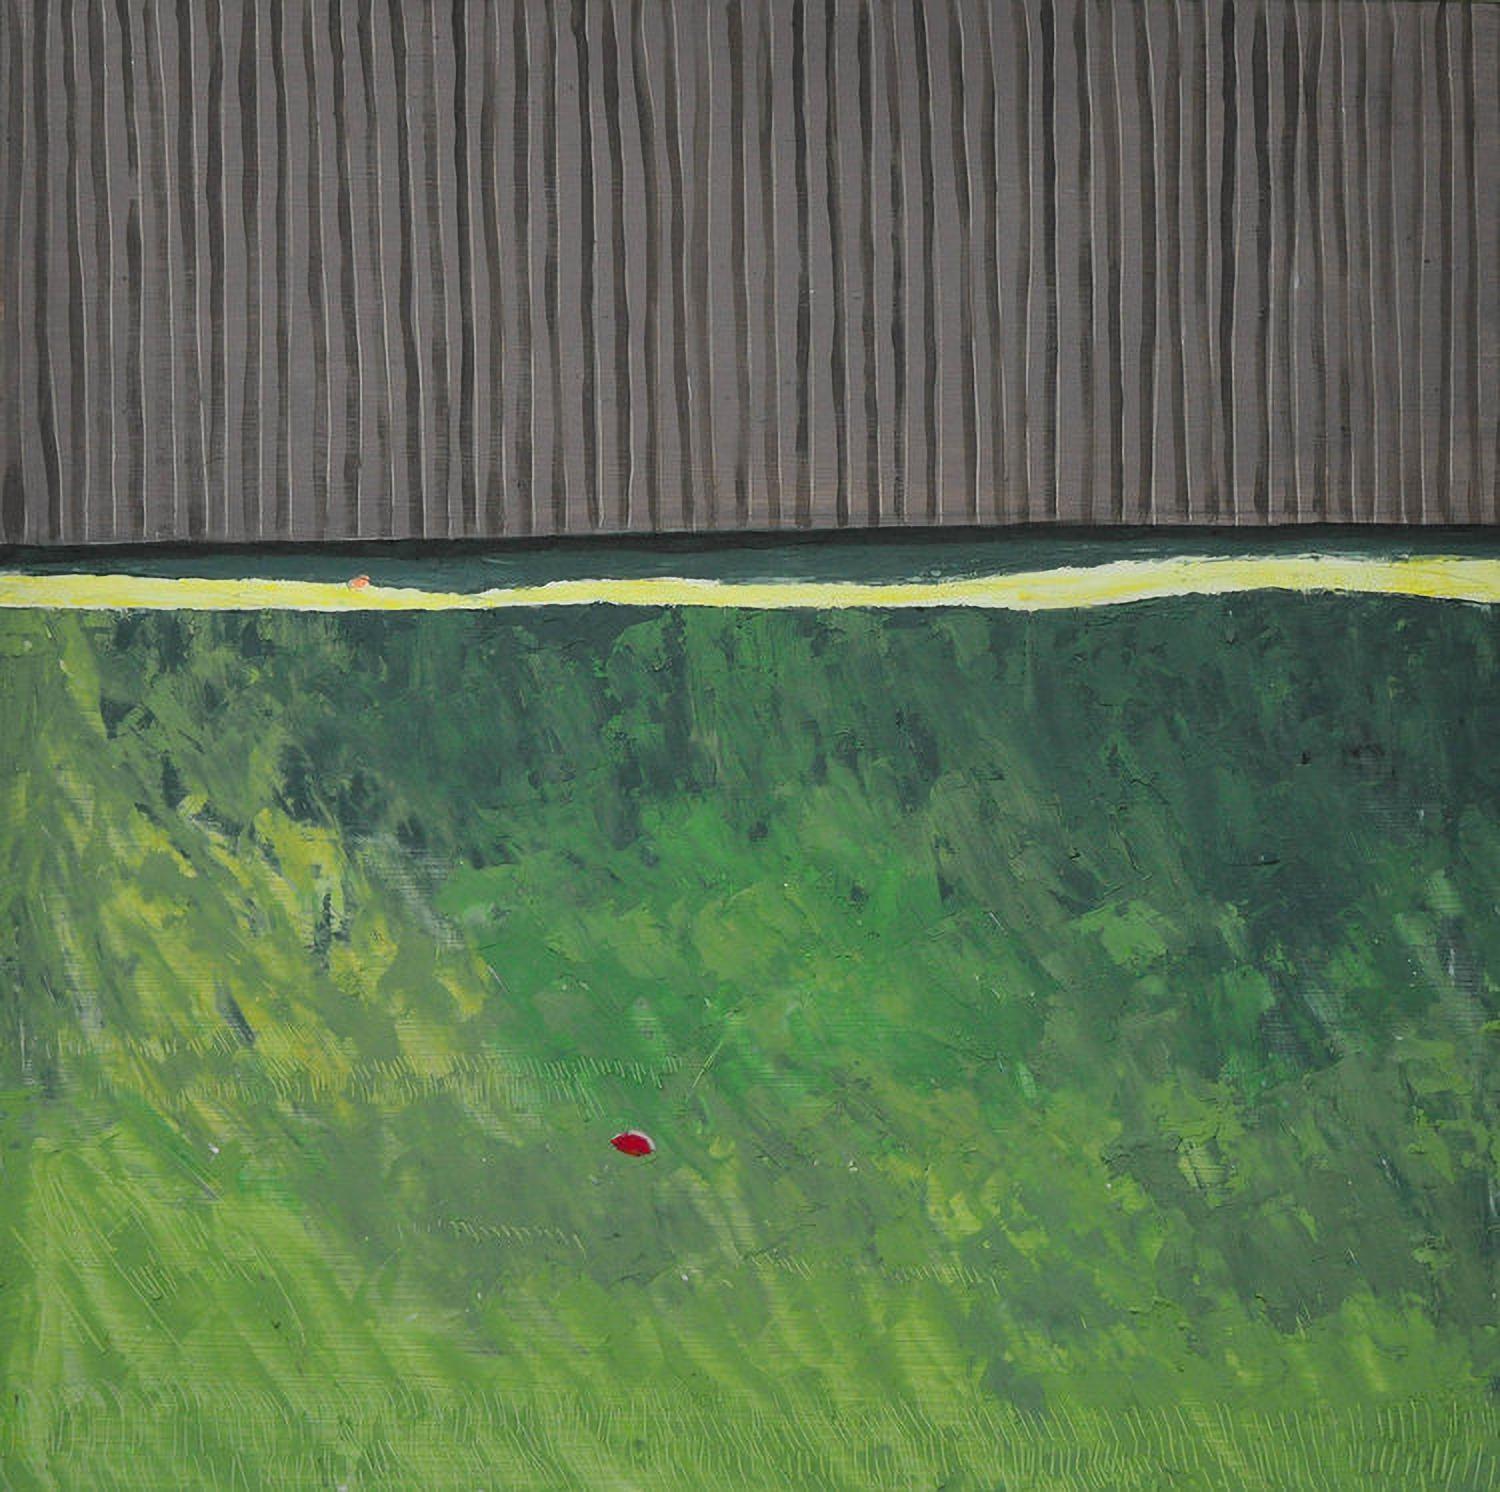 Yard (2016), Oil on panel, backyard landscape with green grass and gray fence